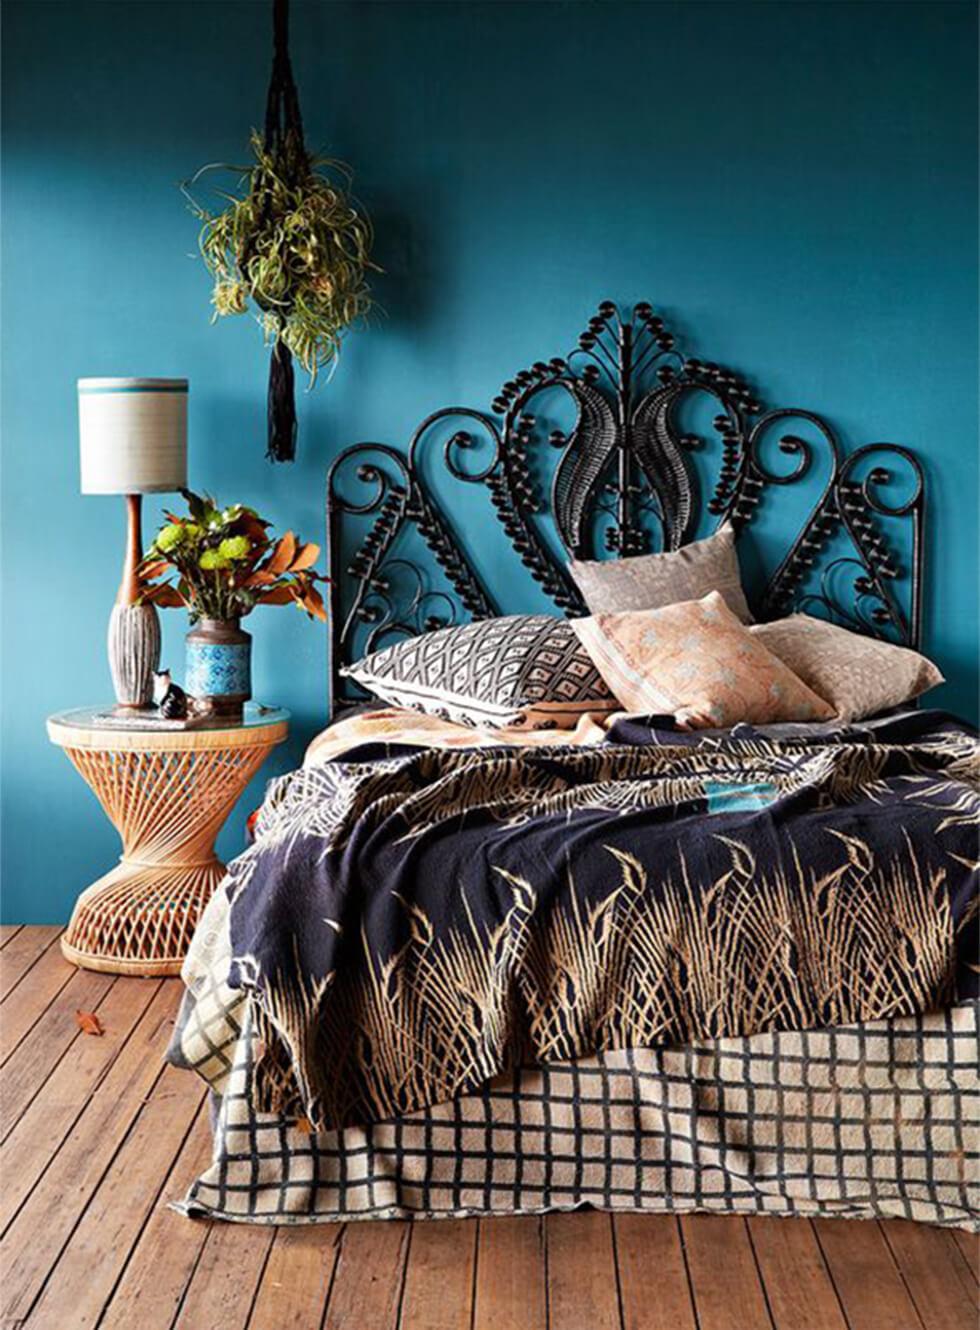 6 great teal bedroom ideas | Furniture And Choice